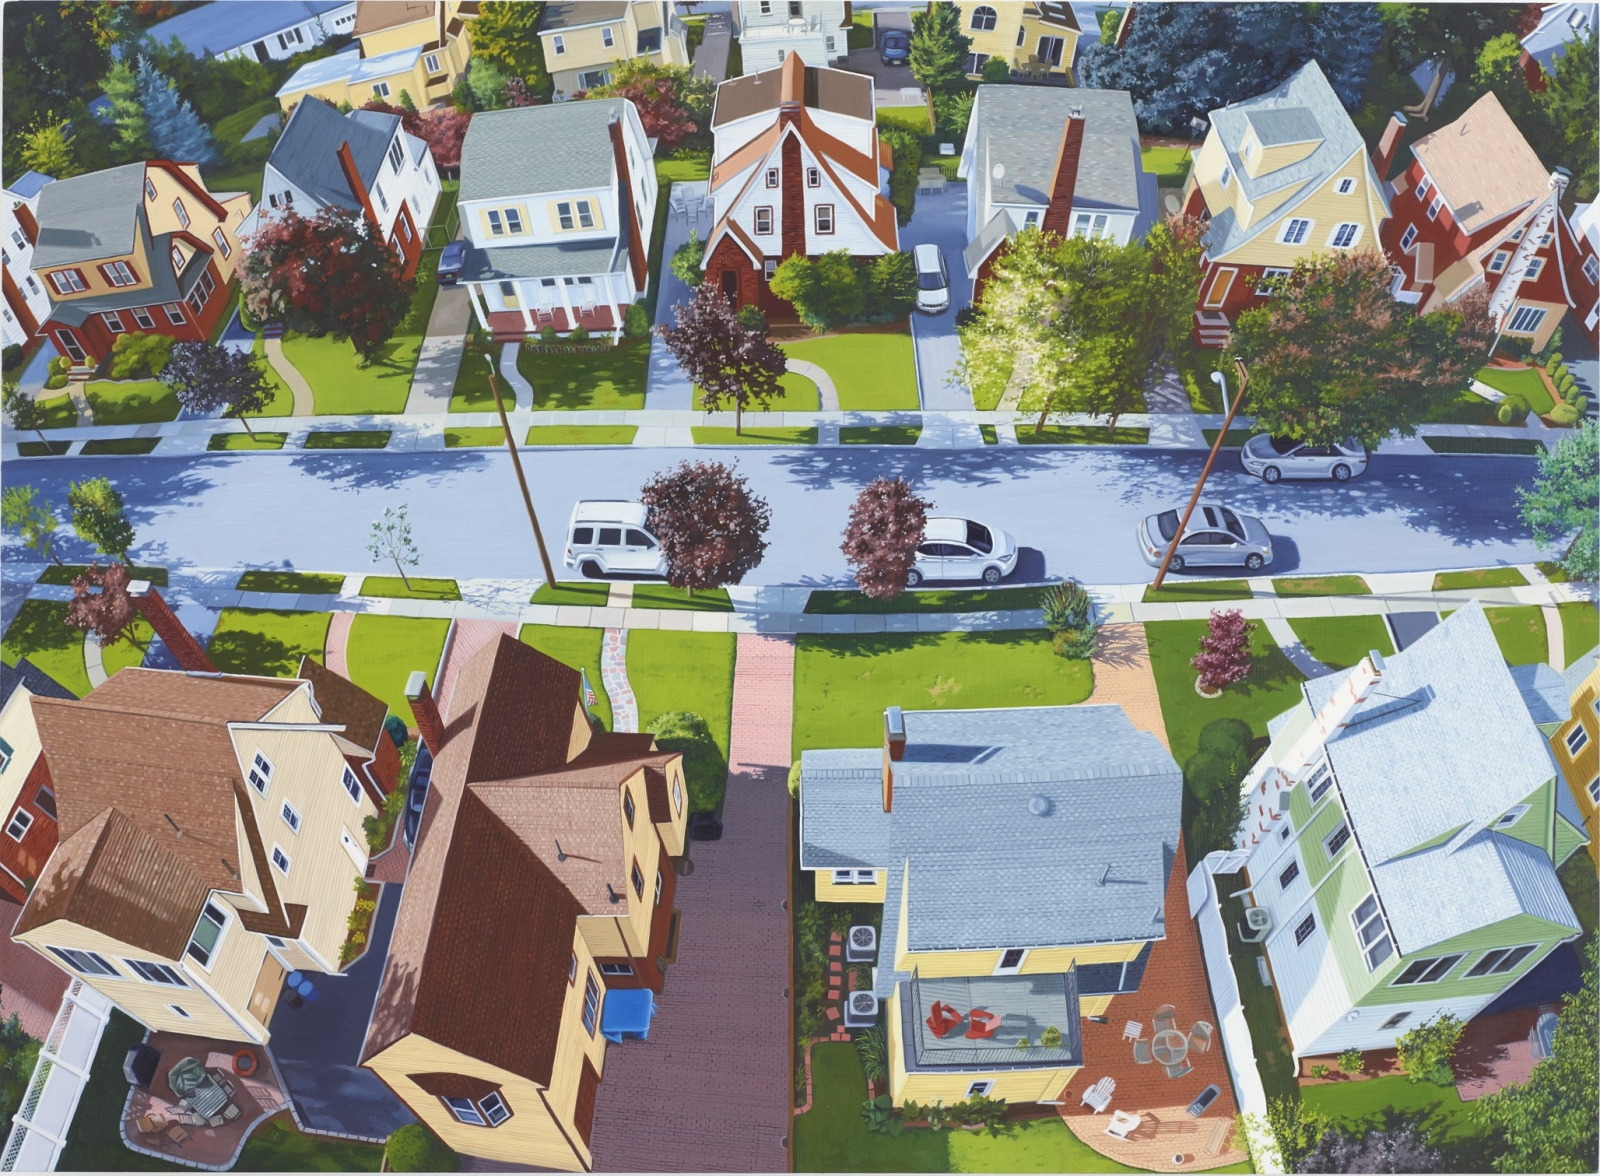 Jessica Rohrer
Aerial View, 2015
oil on panel
11 x 15 in.
27.94 x 38.1 cm